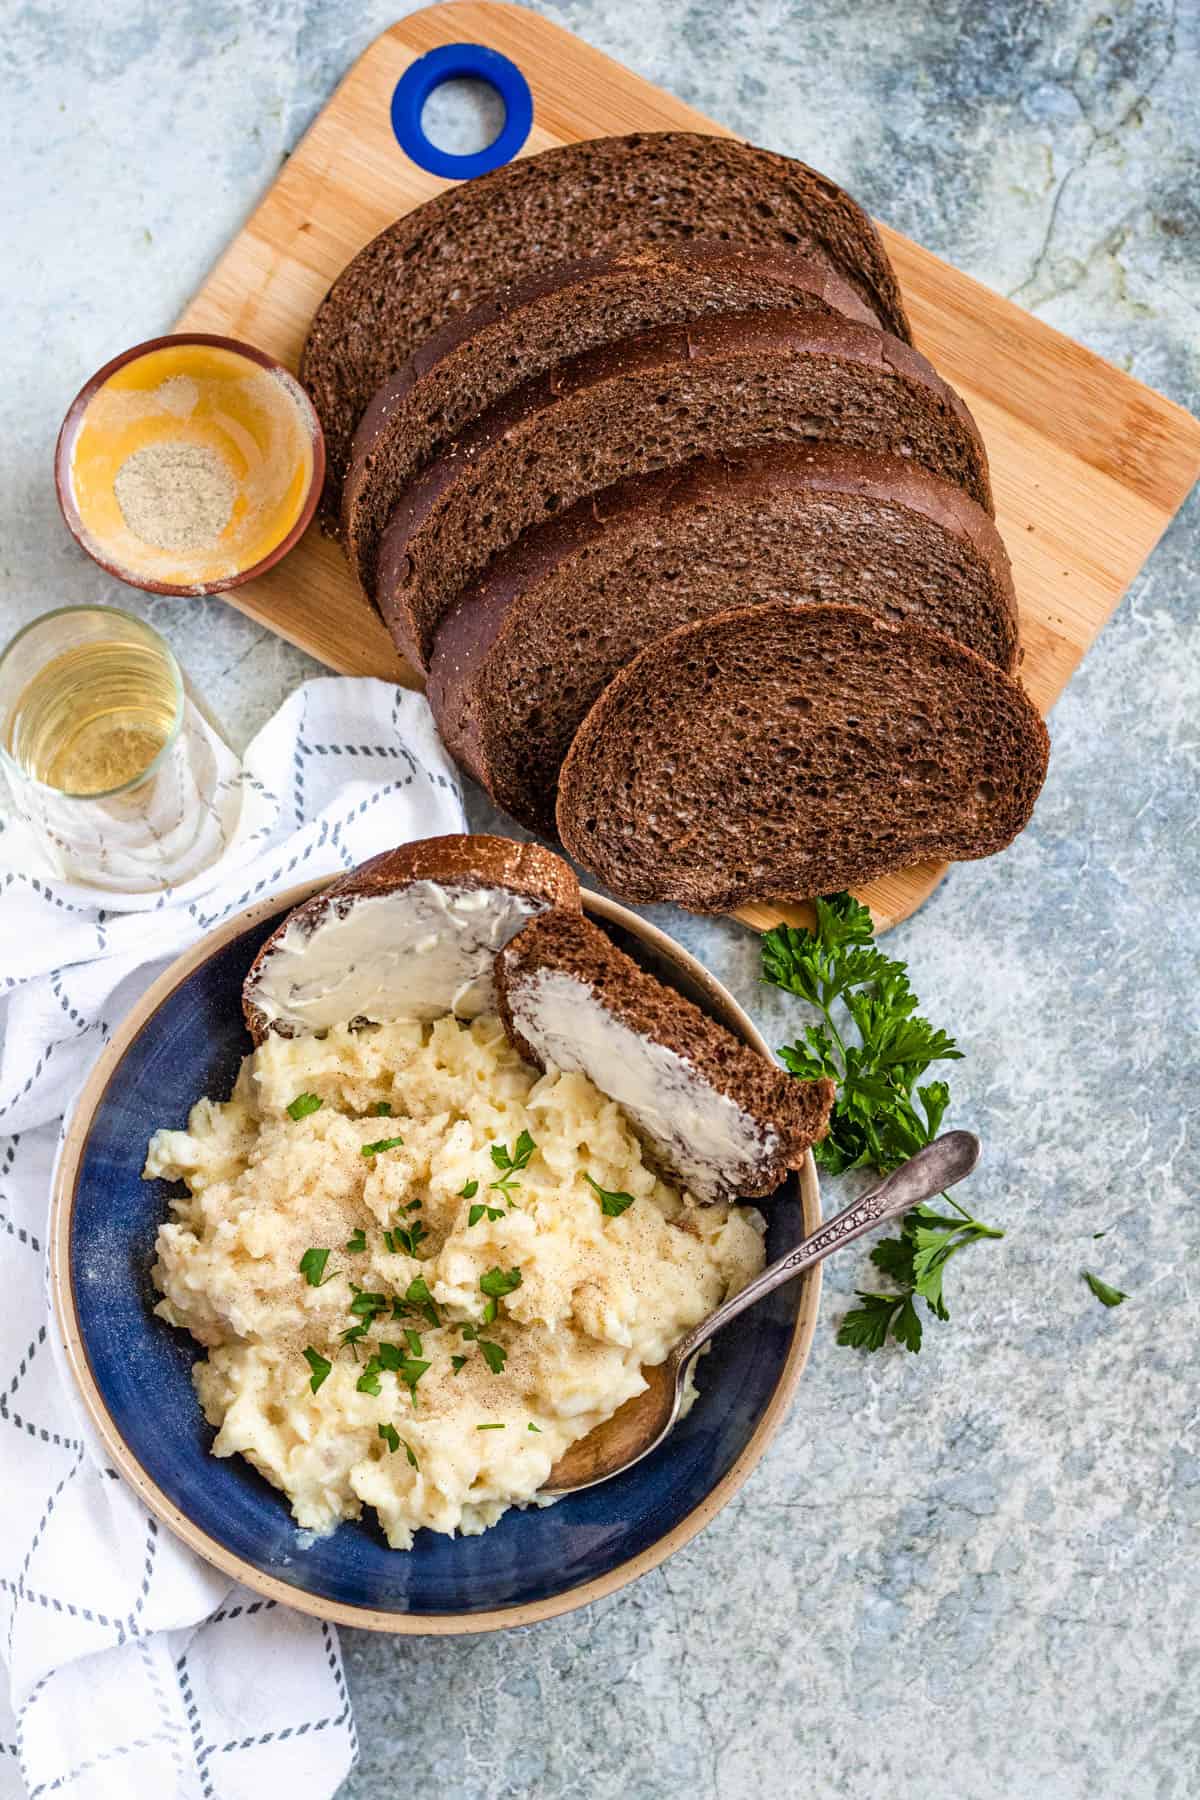 Slices of rye bread on a cutting board and a bowl of Plokkfiskur sitting in front of it with buttered rye bread in the bowl.